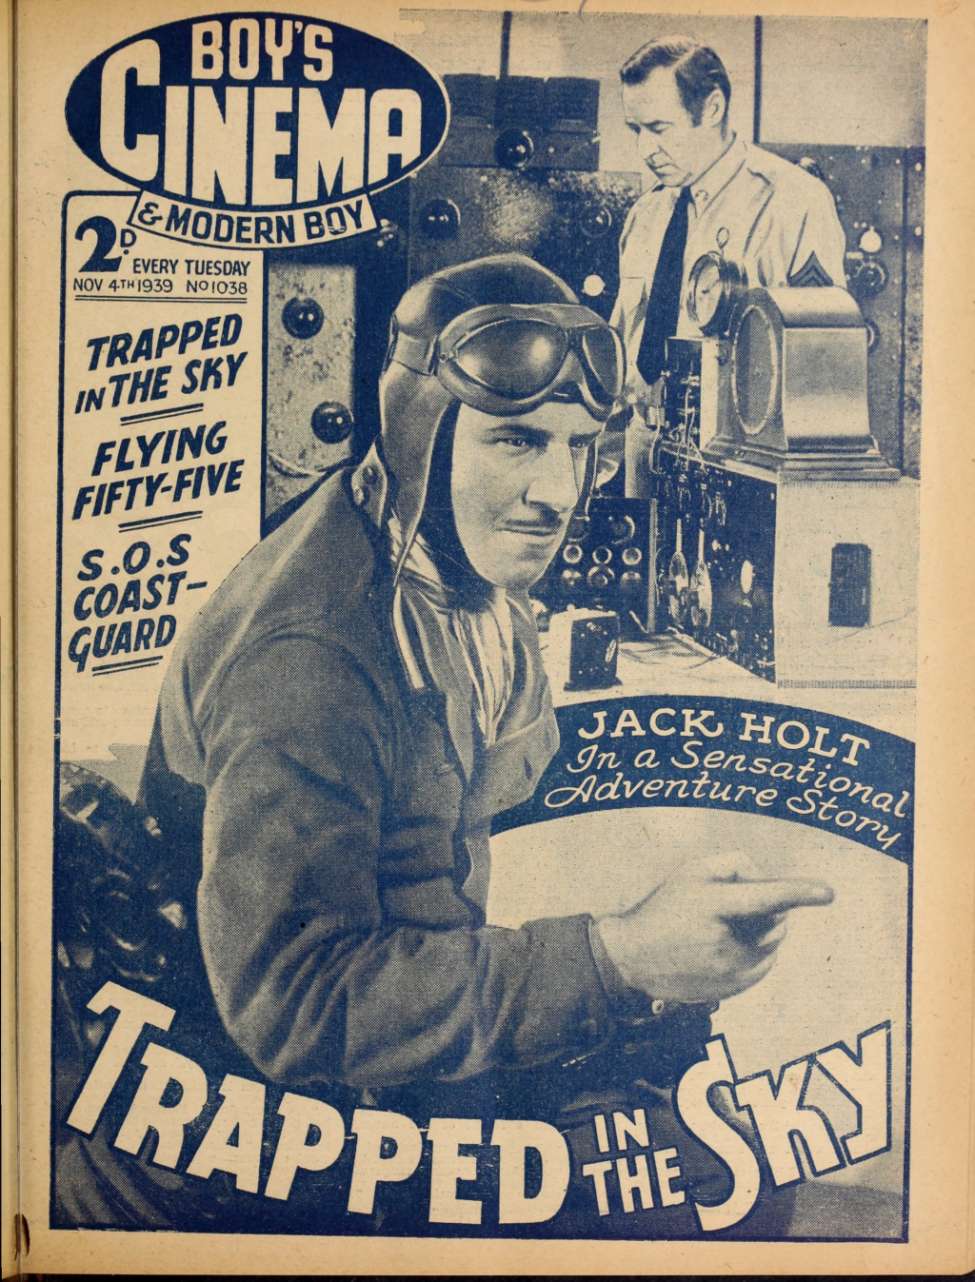 Comic Book Cover For Boy's Cinema 1038 - Trapped in the Sky - Jack Holt